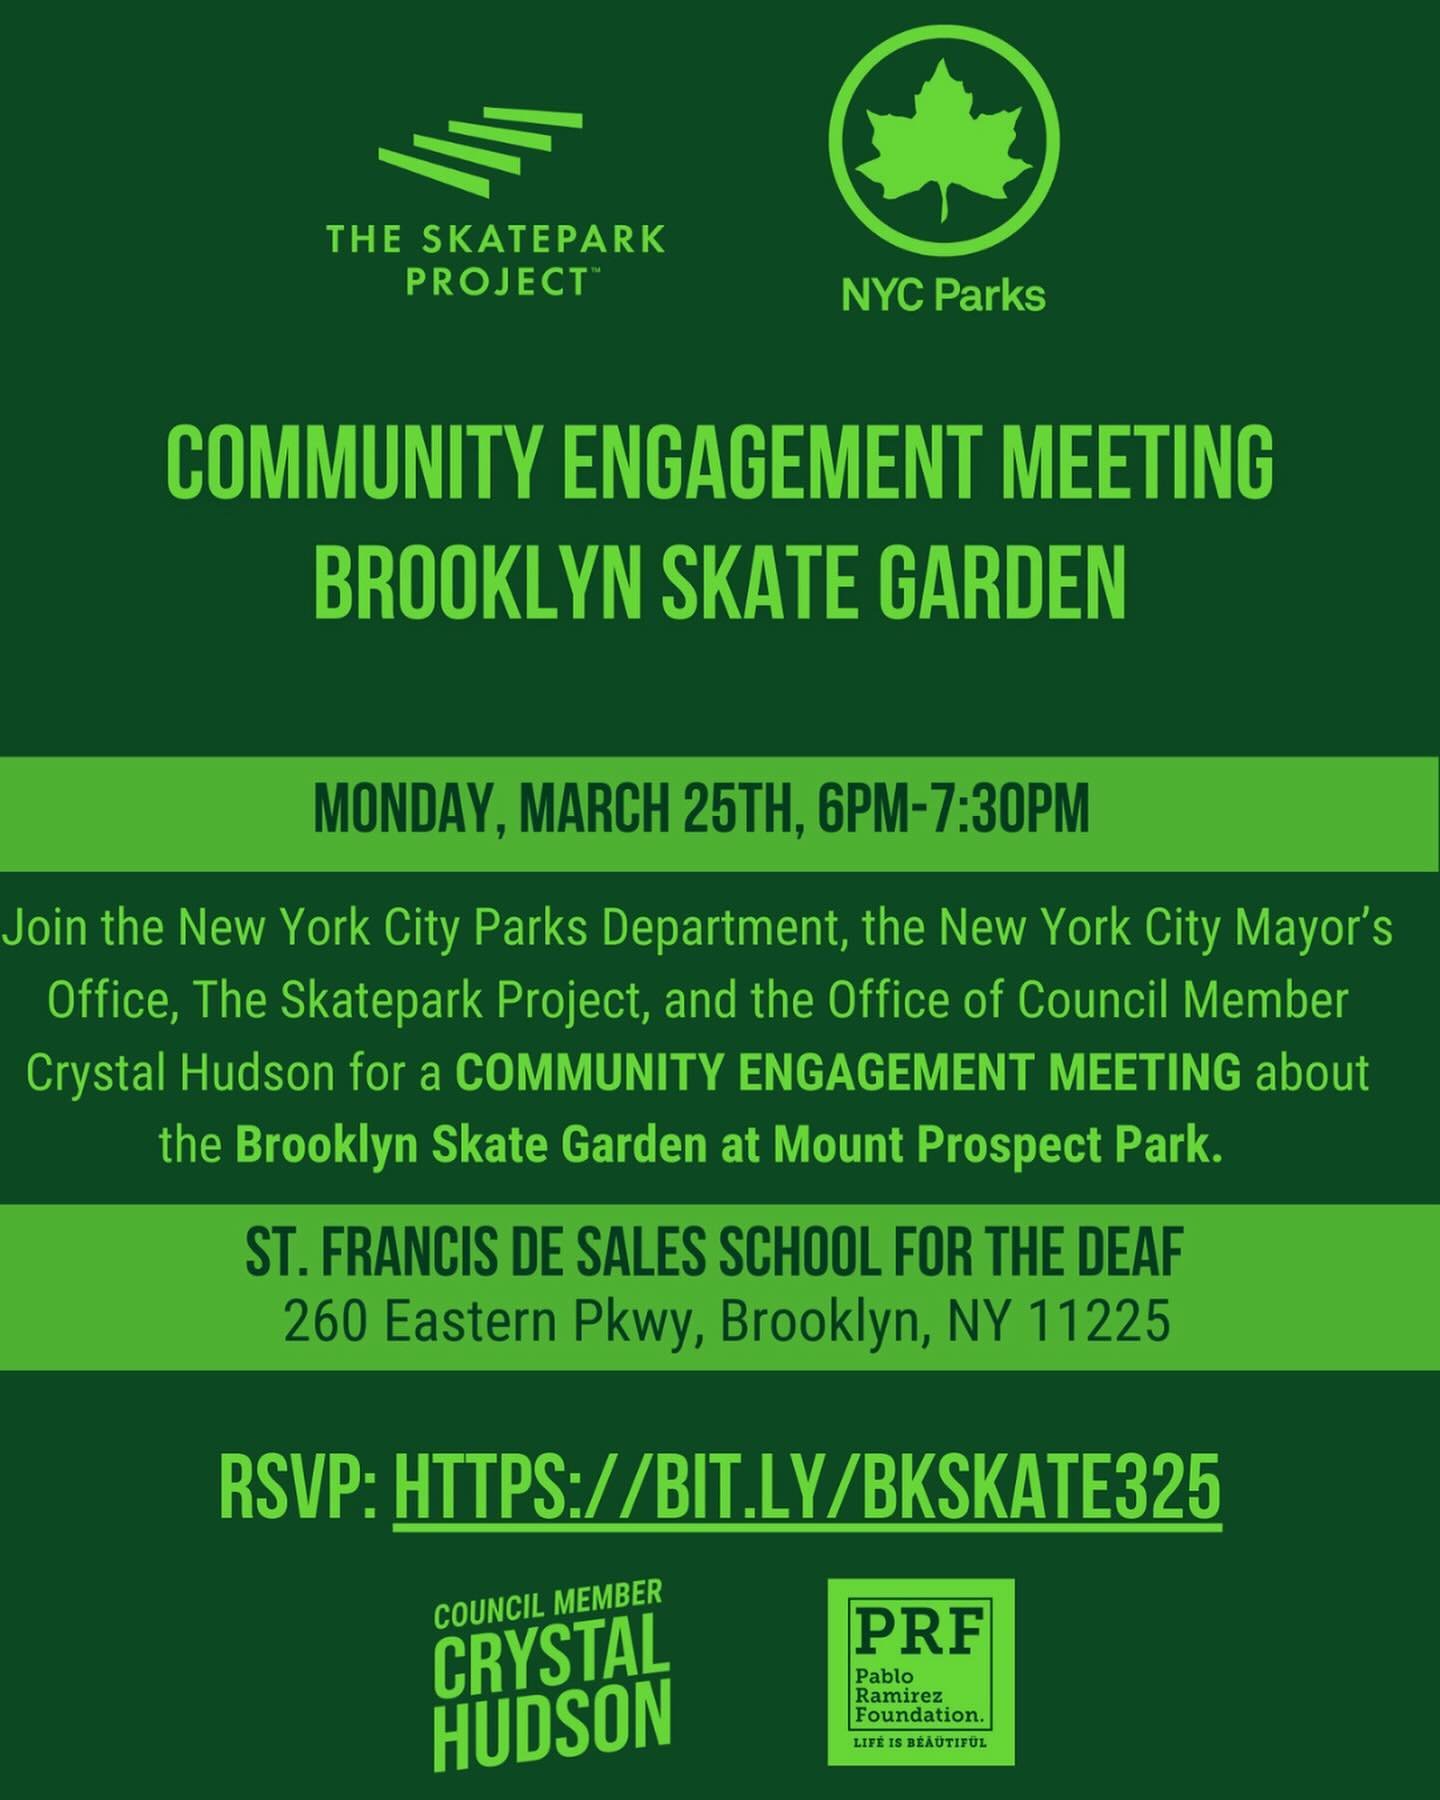 NYC Skaters use your voices to rally to support BSG, a project of the Pablo Ramirez Foundation, at our Community Meeting Mon 3/25 
at 5:30 p.m.
 
Tomorrow join us along with our skate advocates, our elected officials, the NYC Parks Dept. 
and more.
 